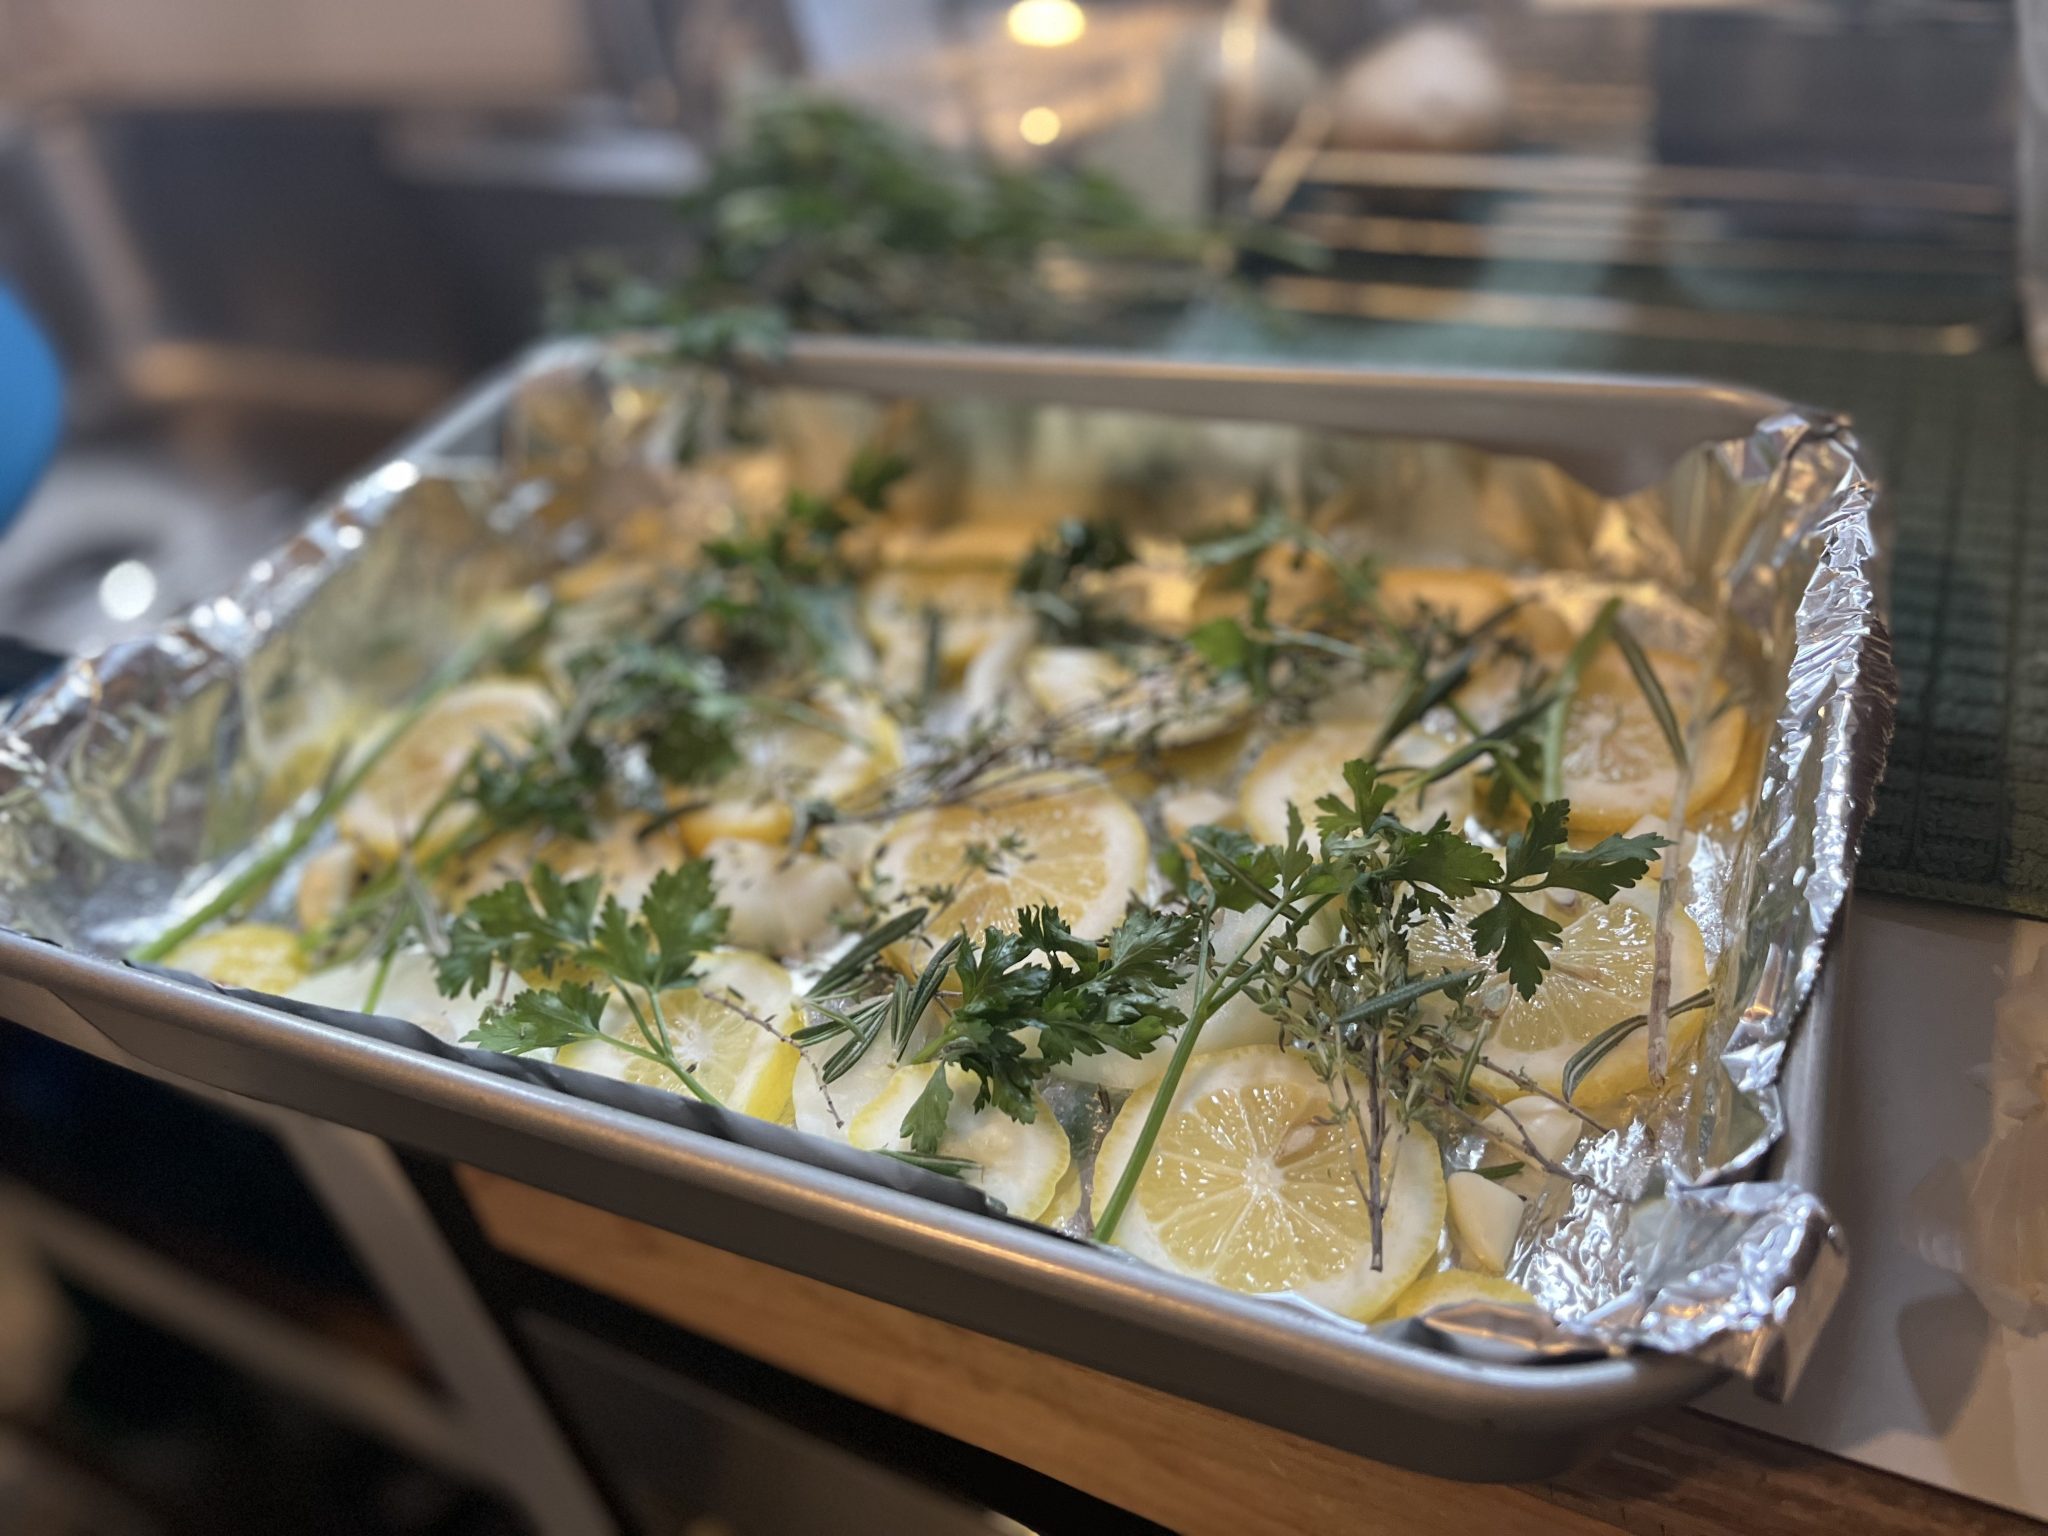 Lemon and parsely cooking bed